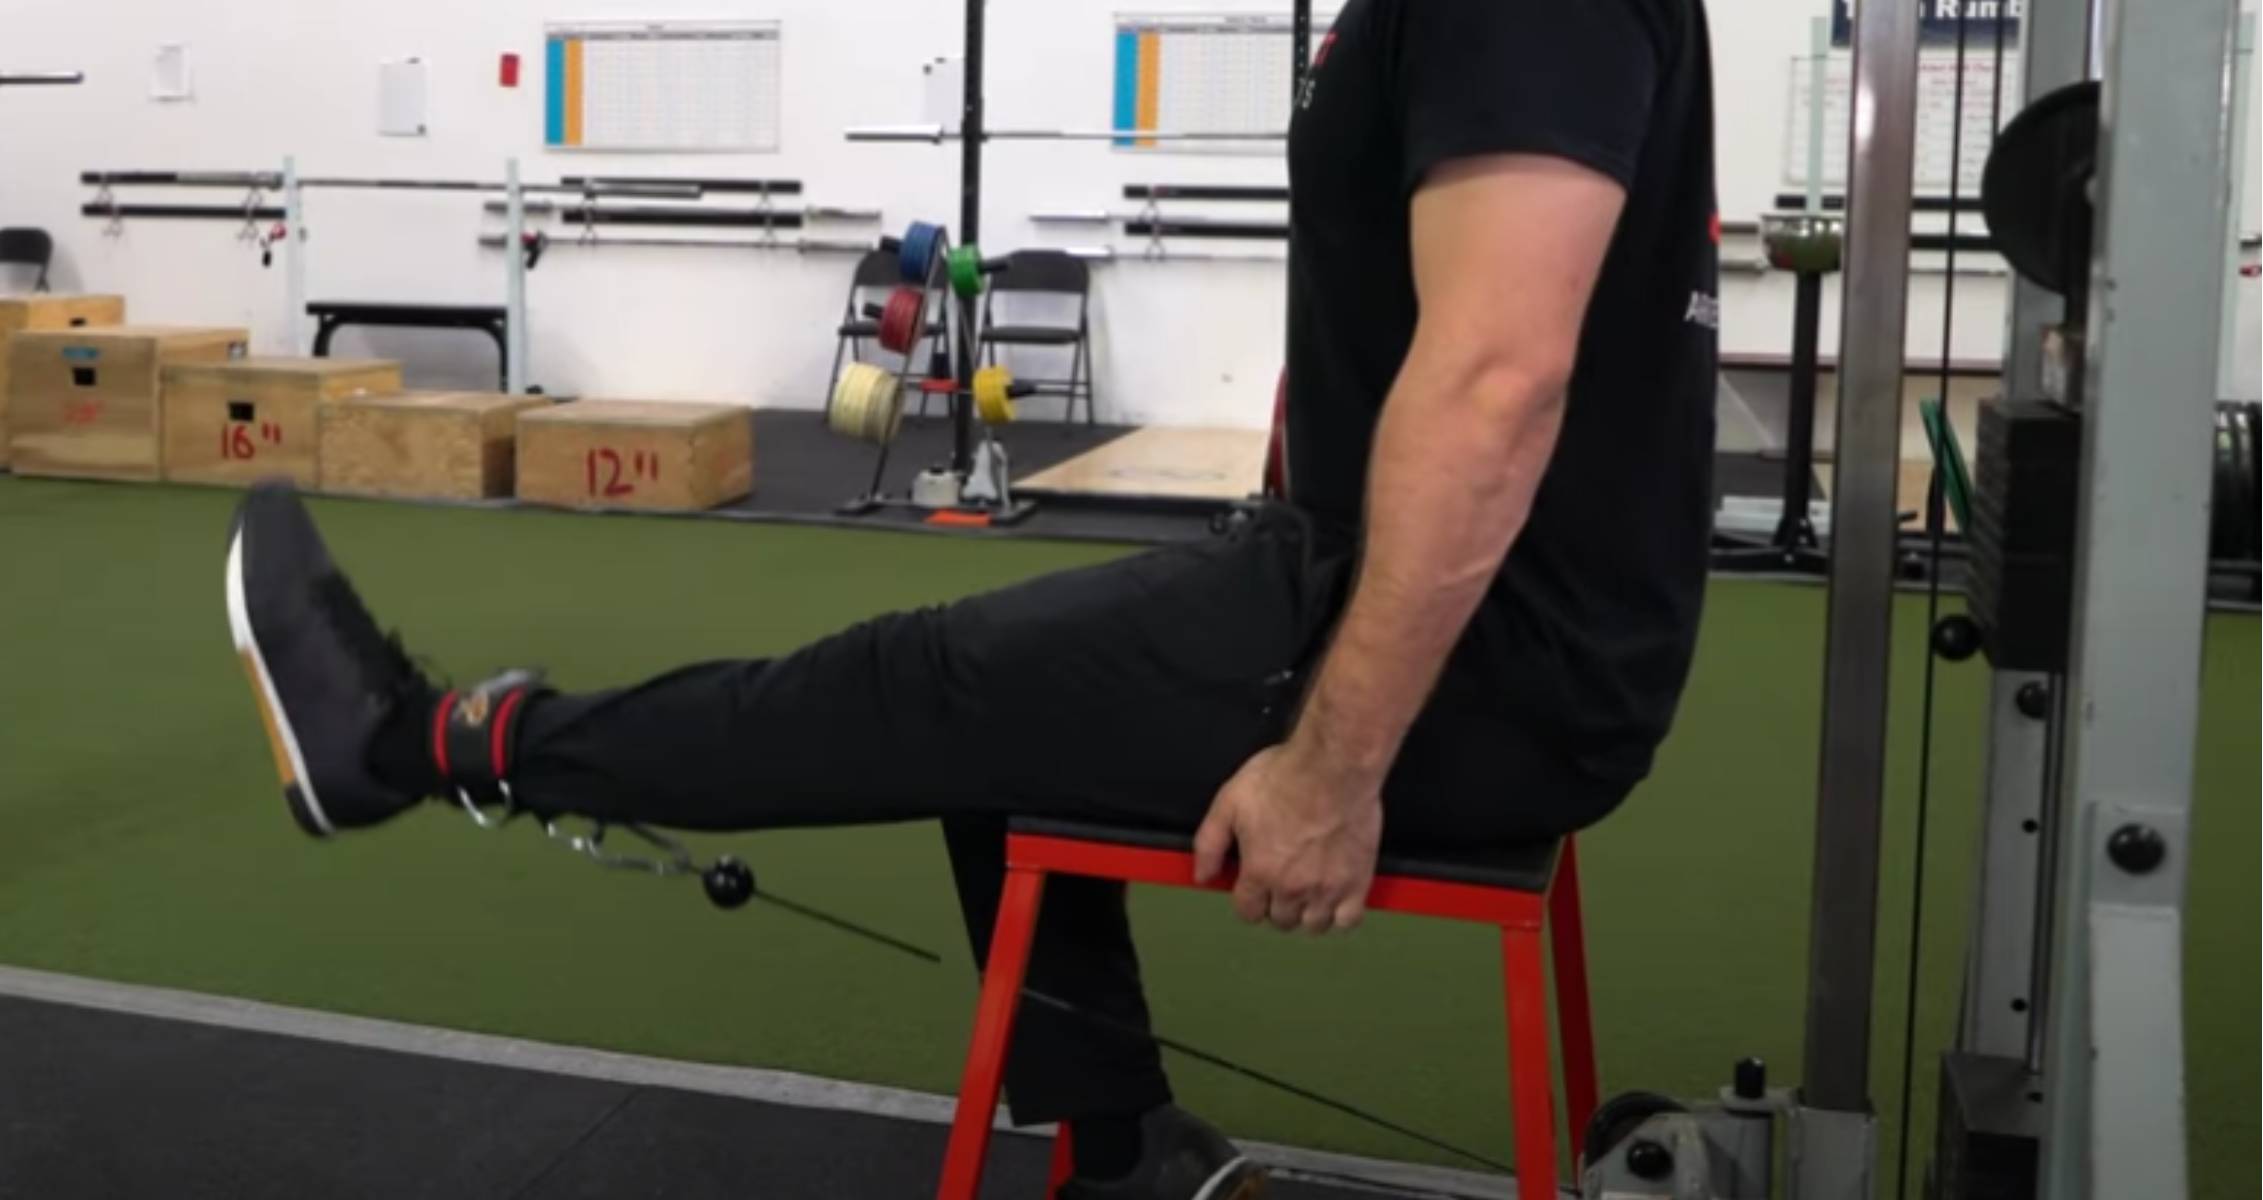 Cable Leg Extension Exercise Guide — How to, Benefits, and More -  Generation Iron Fitness & Strength Sports Network